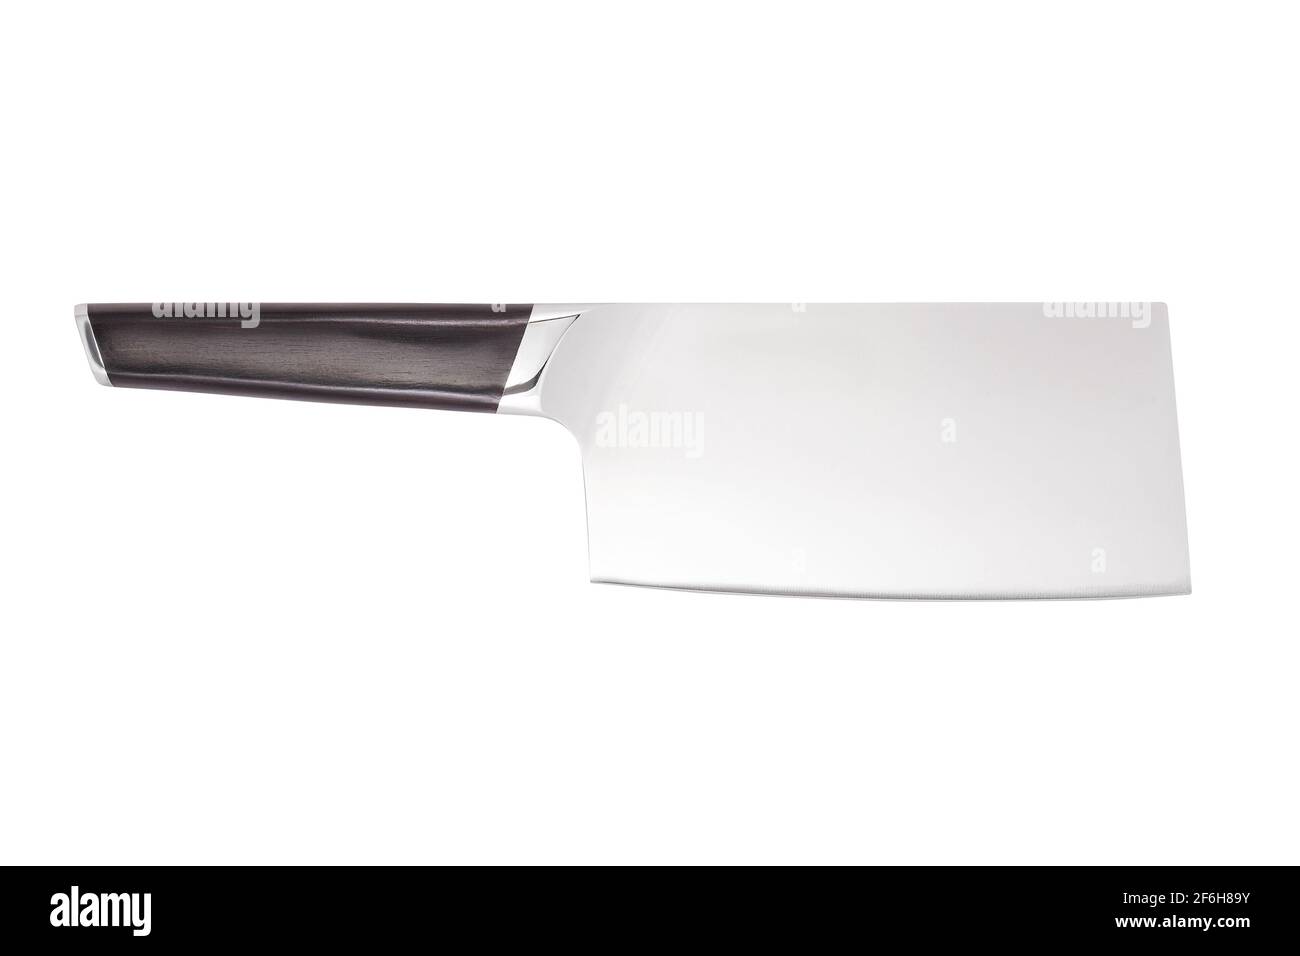 Stainless steel butcher's knife isolated on white background. Meat cleaver knife. Stock Photo